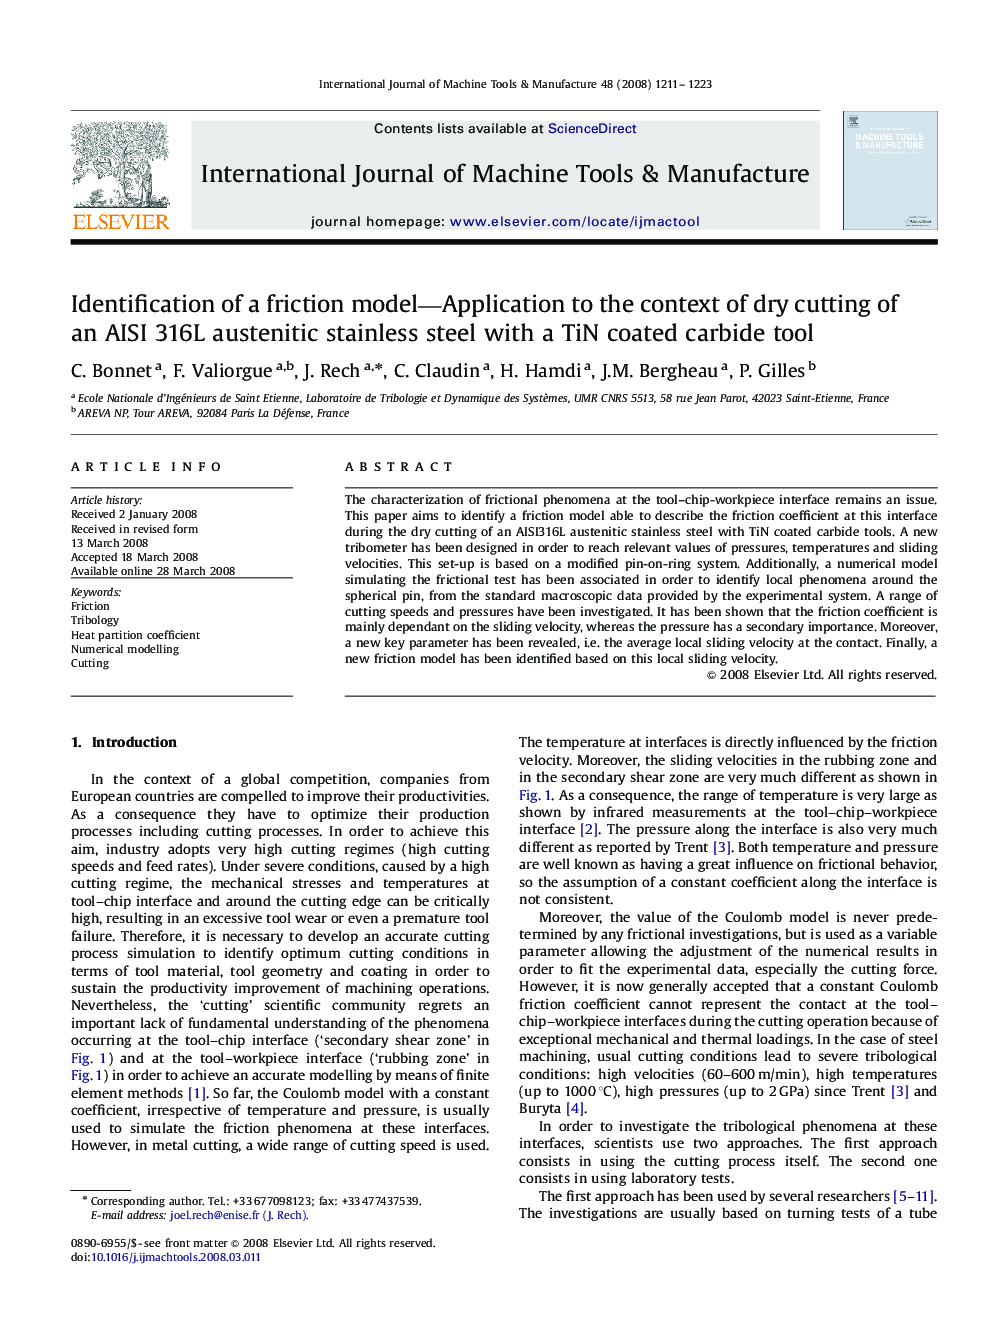 Identification of a friction model—Application to the context of dry cutting of an AISI 316L austenitic stainless steel with a TiN coated carbide tool